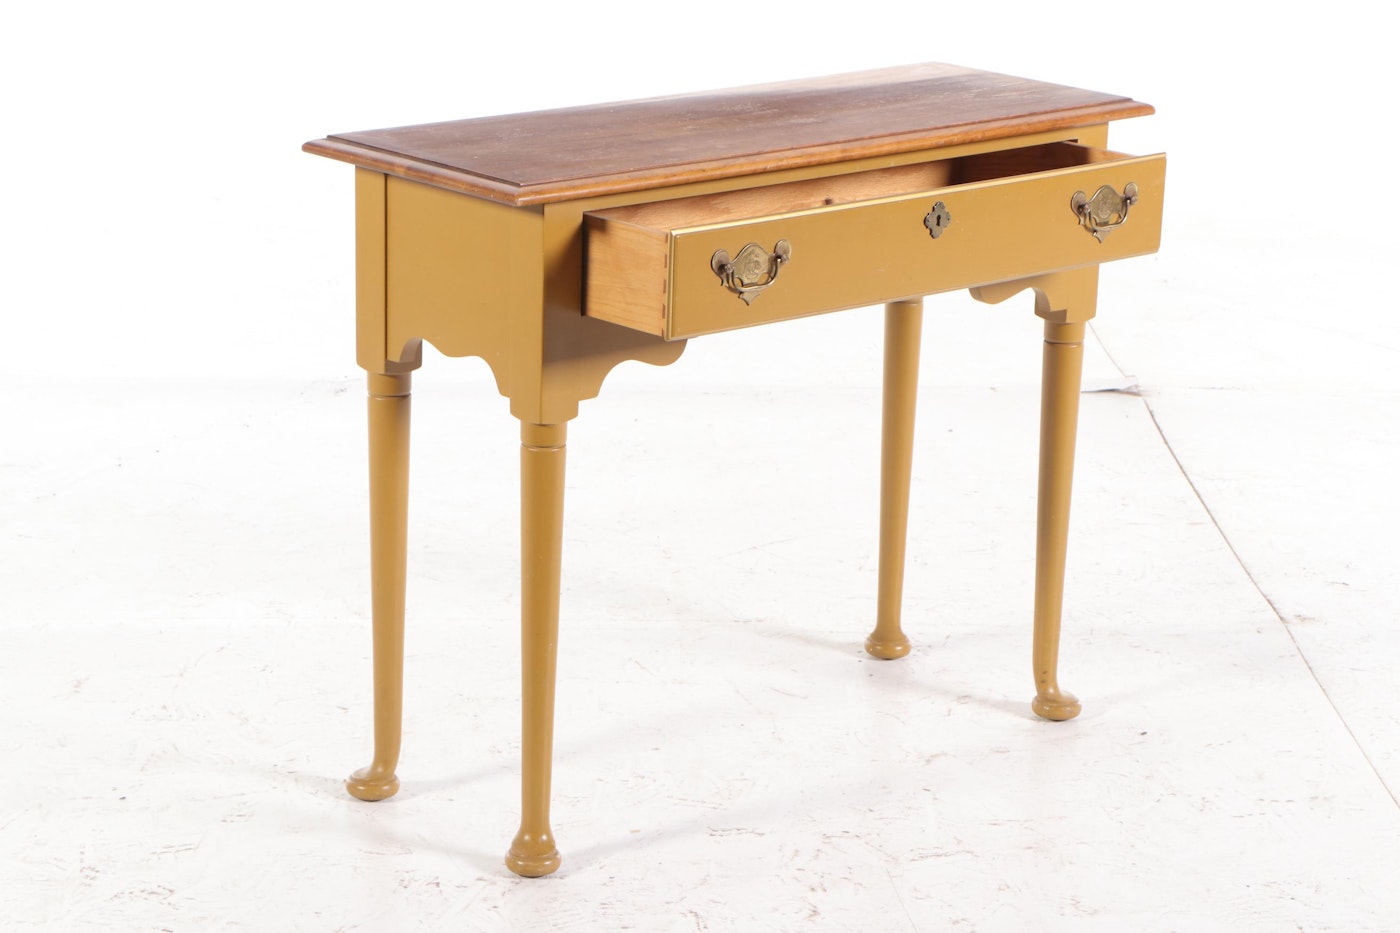 Statton Trutype Americana Dining Room Table